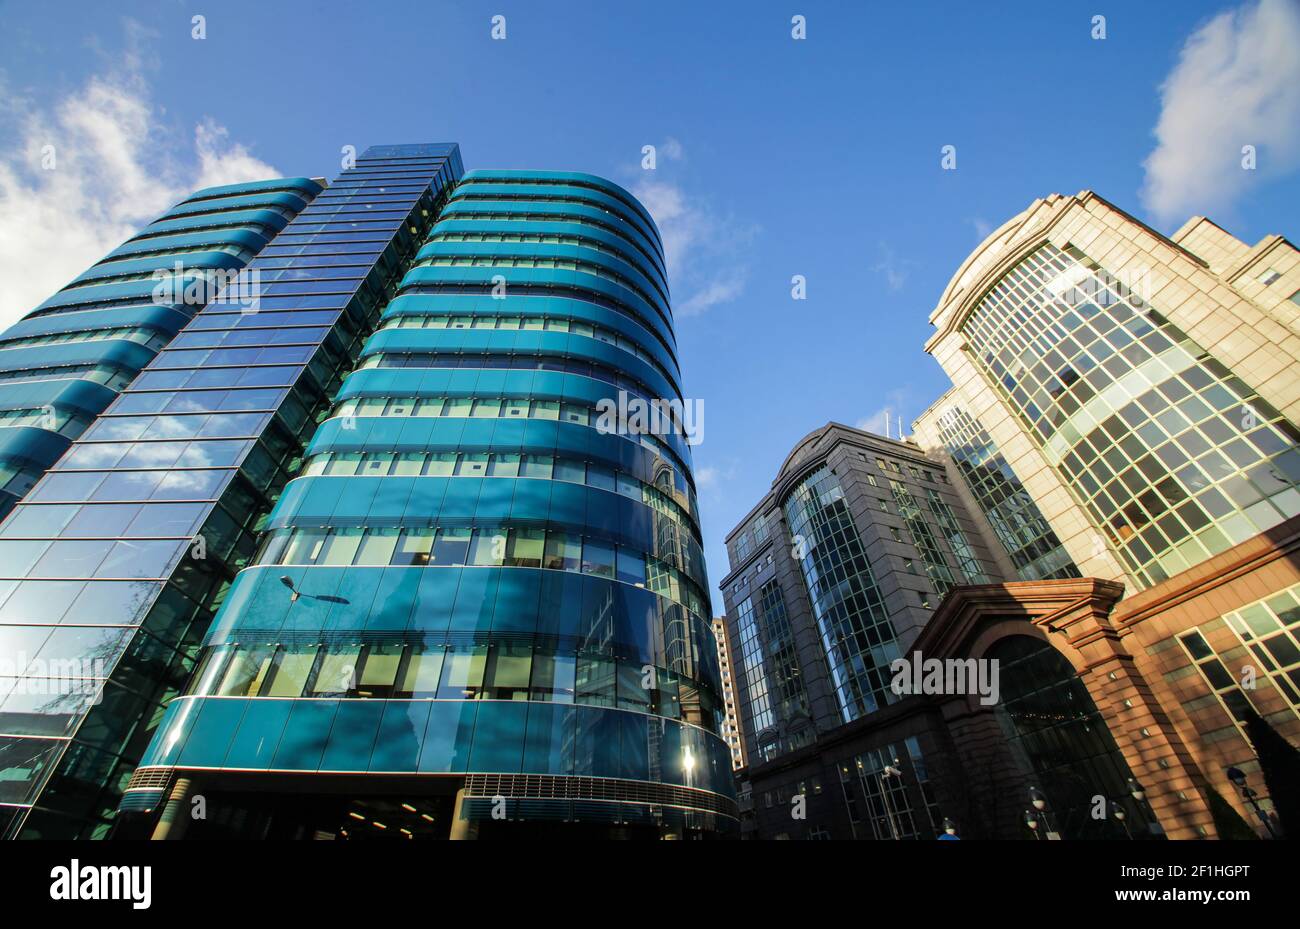 London commercial district Stock Photo